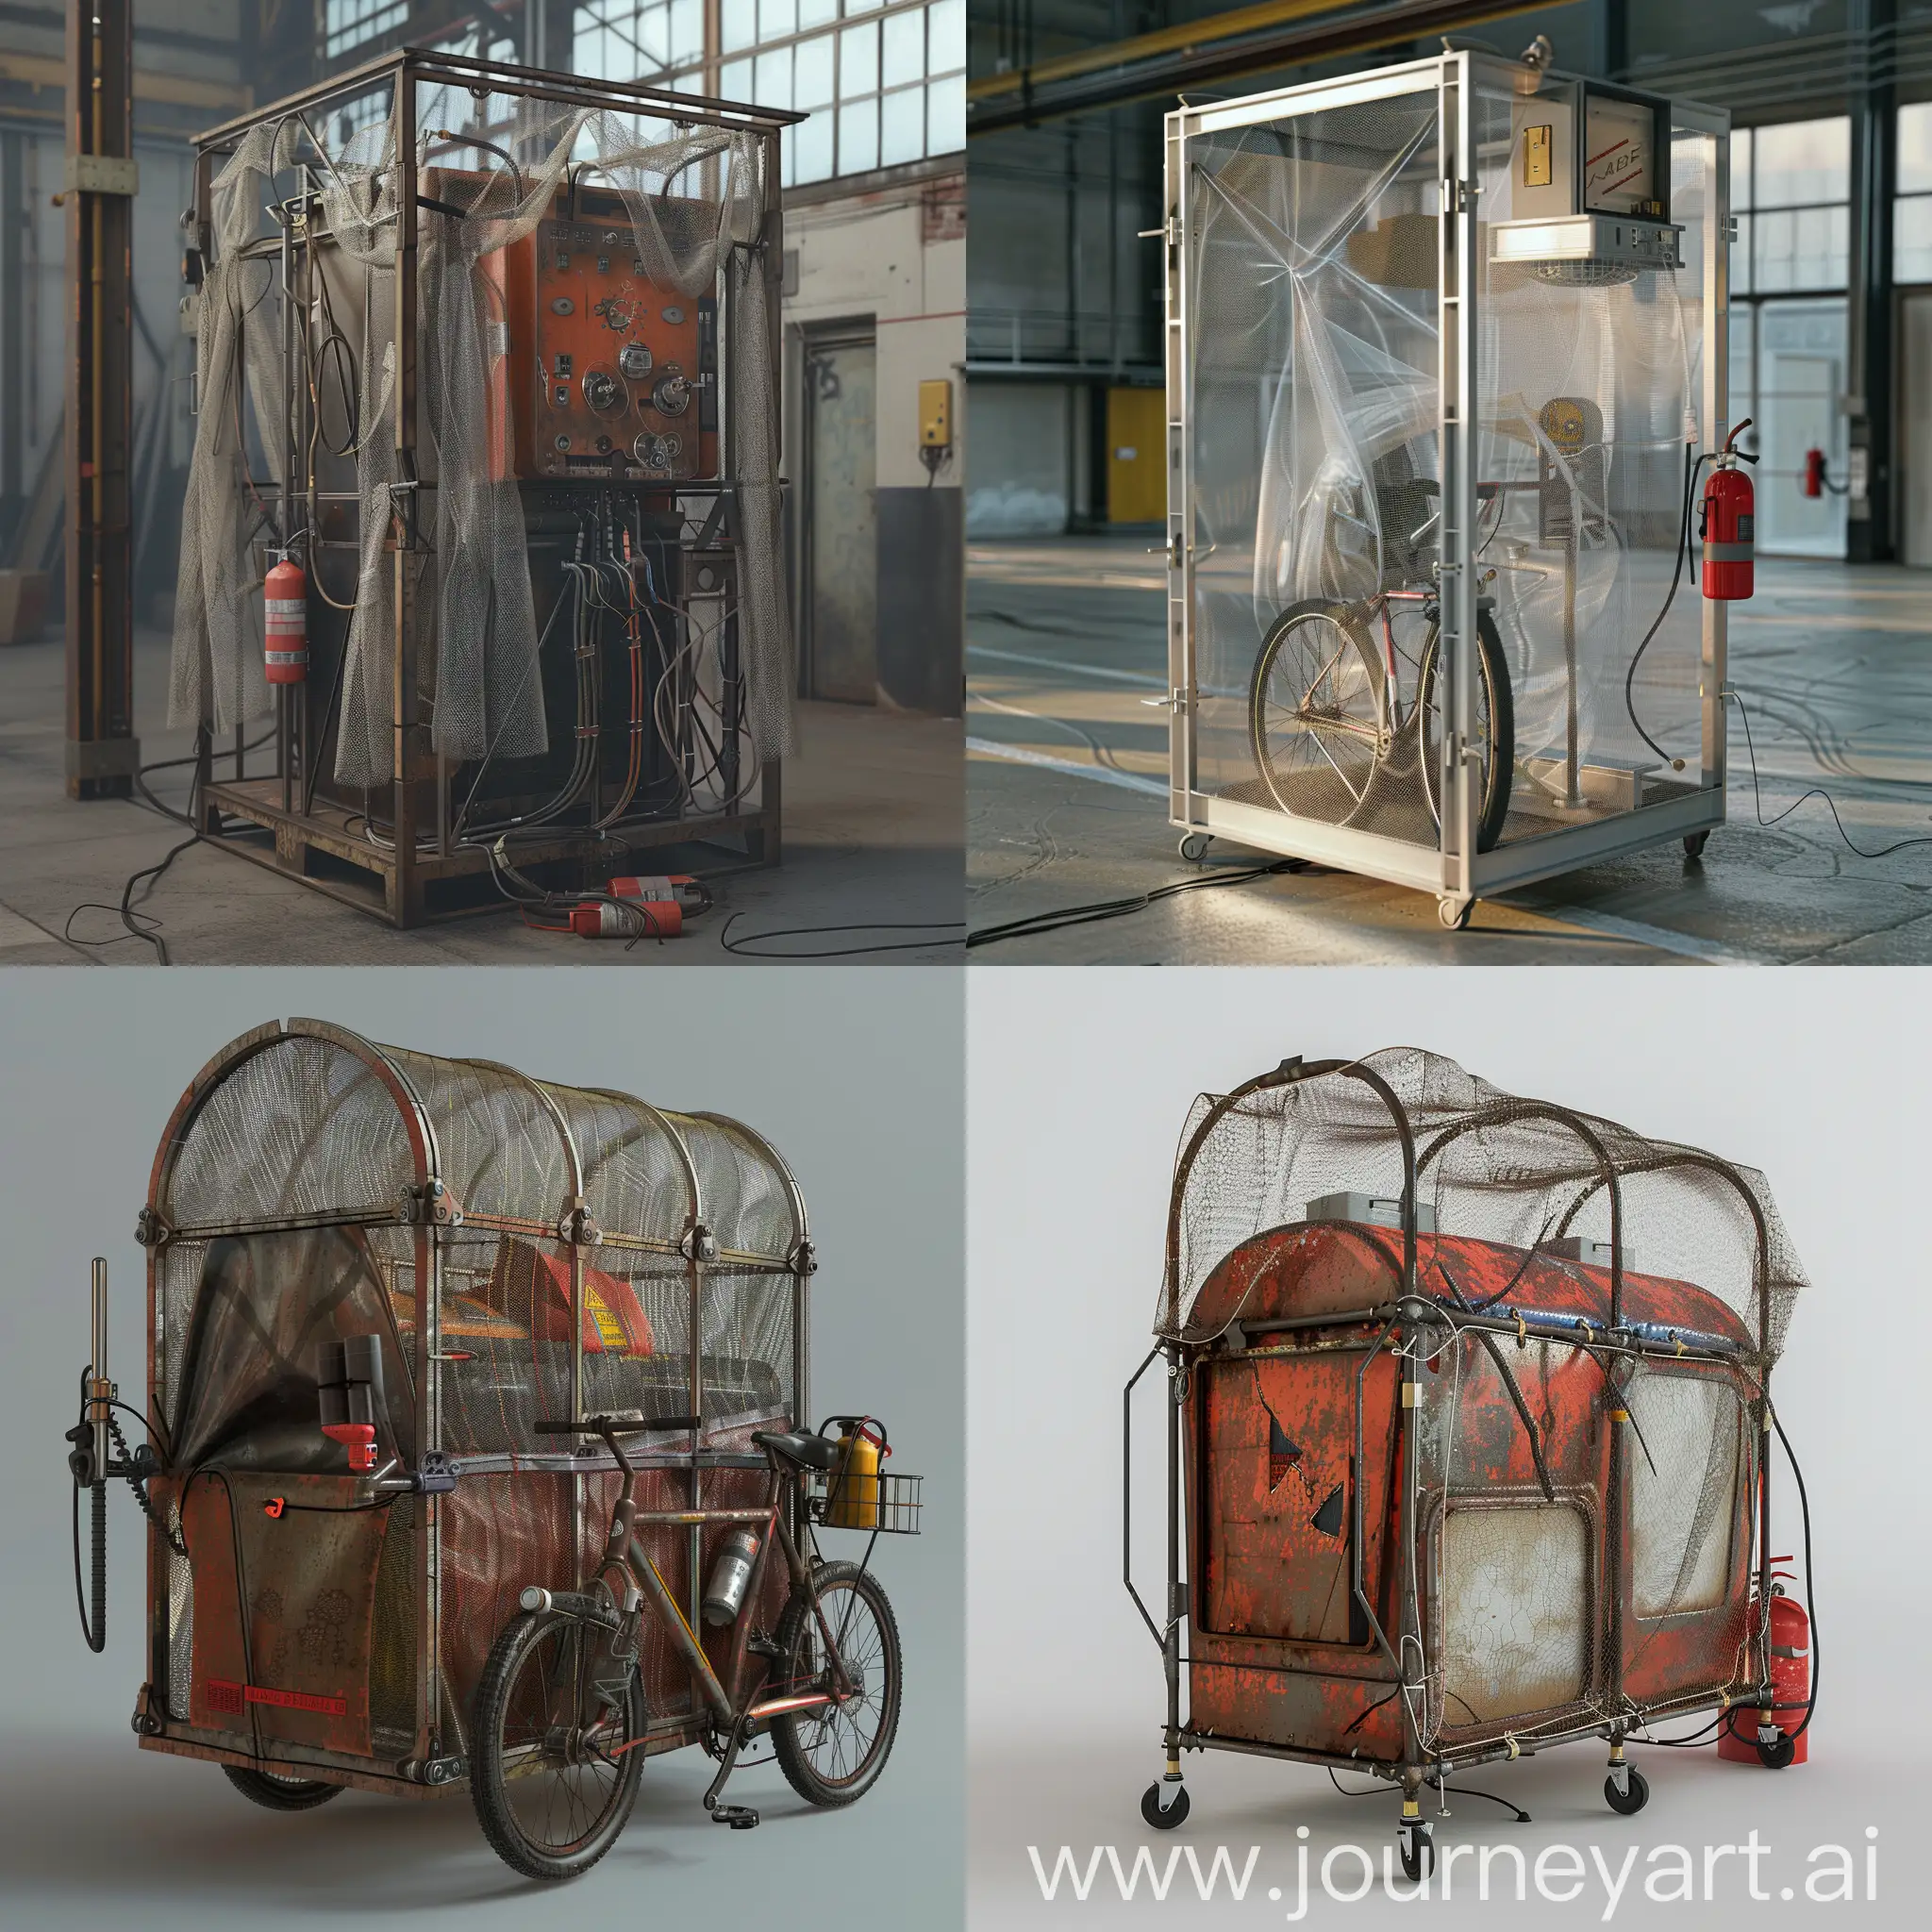 Inventive-Metal-Cabinet-Frame-Structure-with-Bicycle-Elements-and-Mosquito-Net